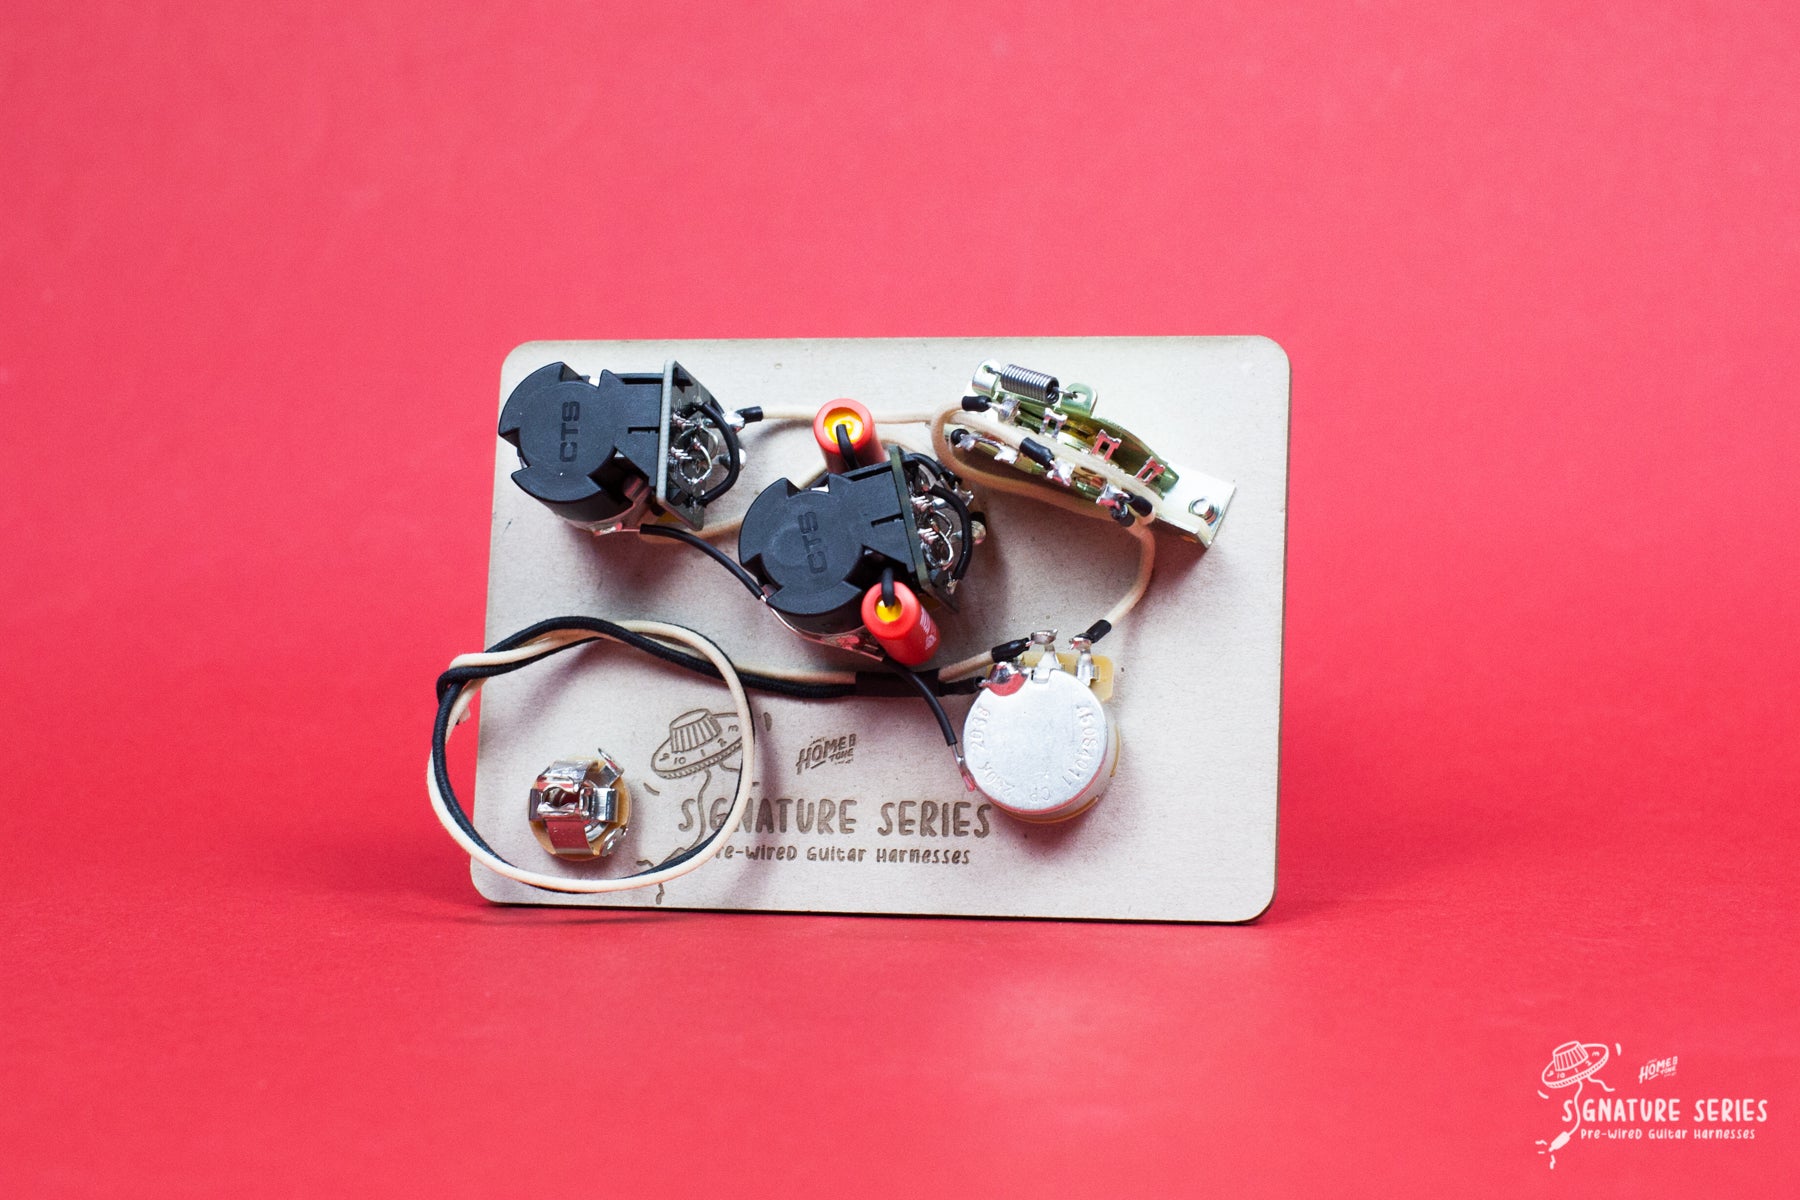 Two new strat wiring kits join the Signature Series range!